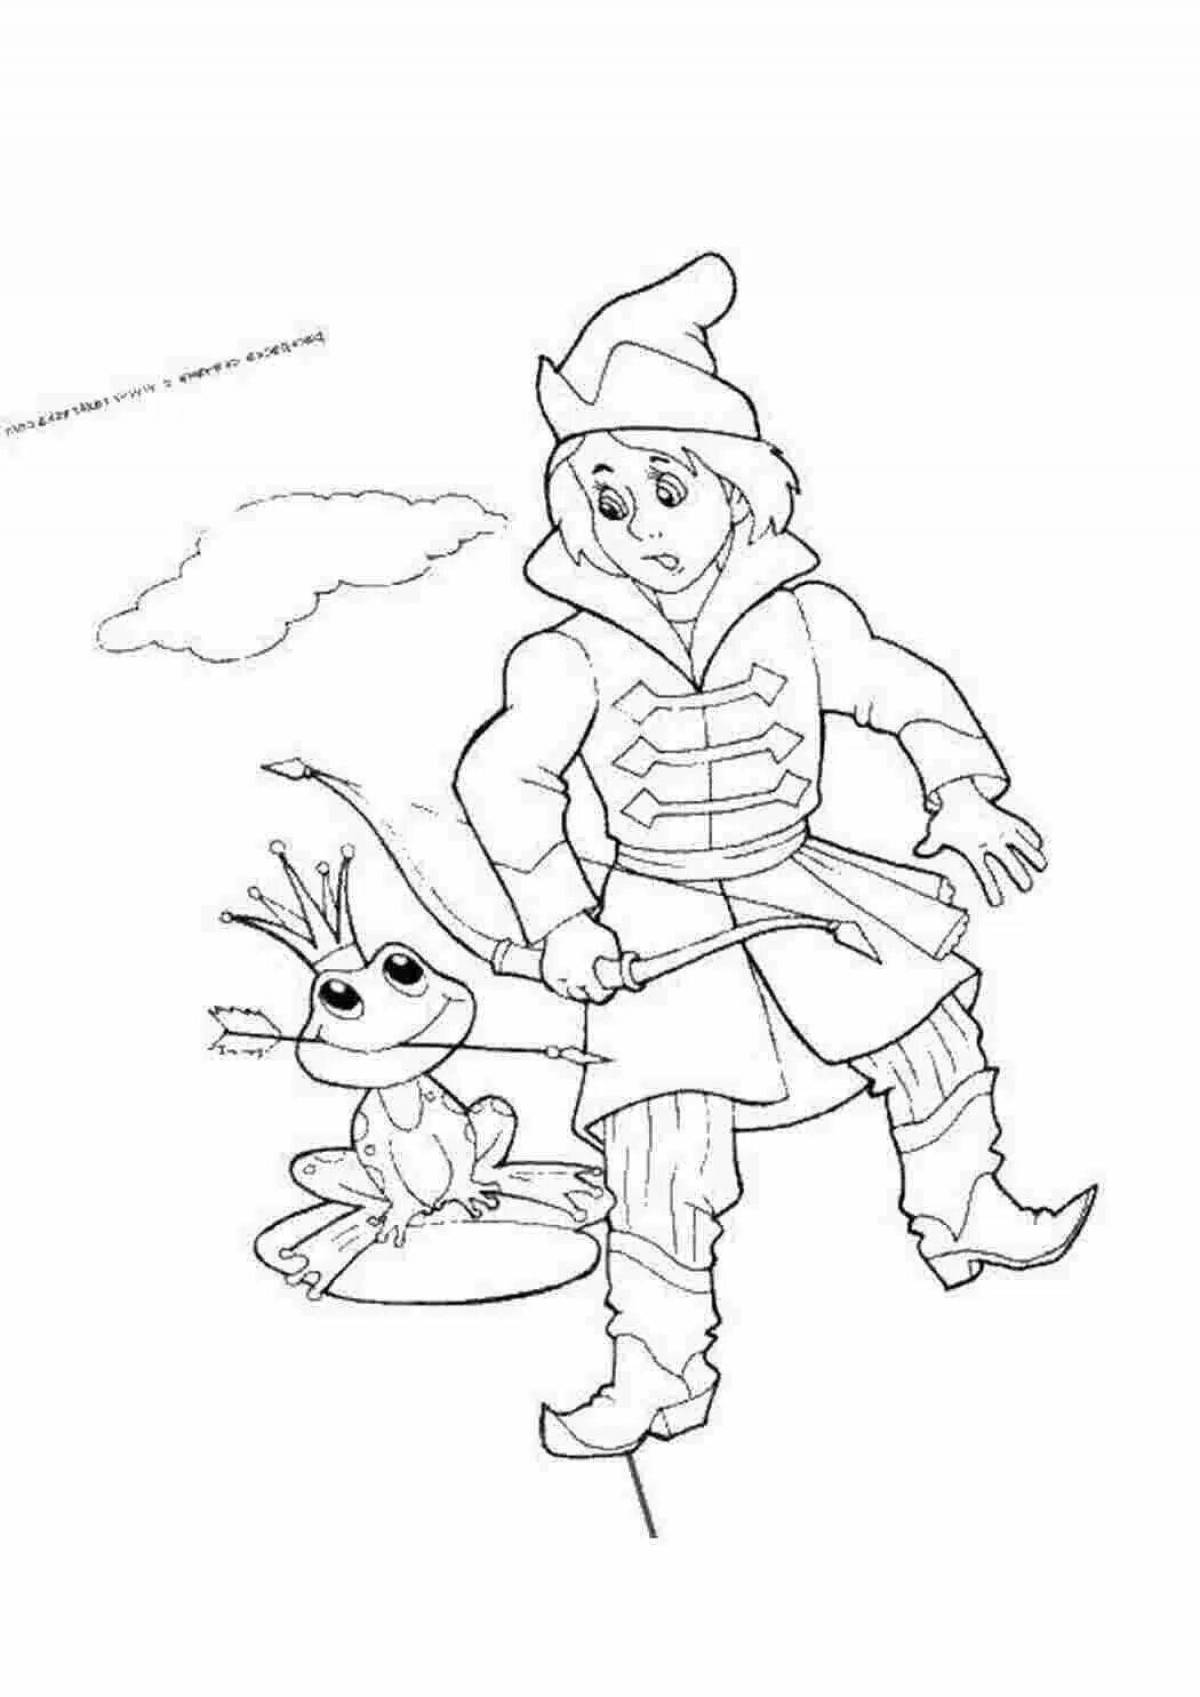 Colourful Ivan the Fool coloring book